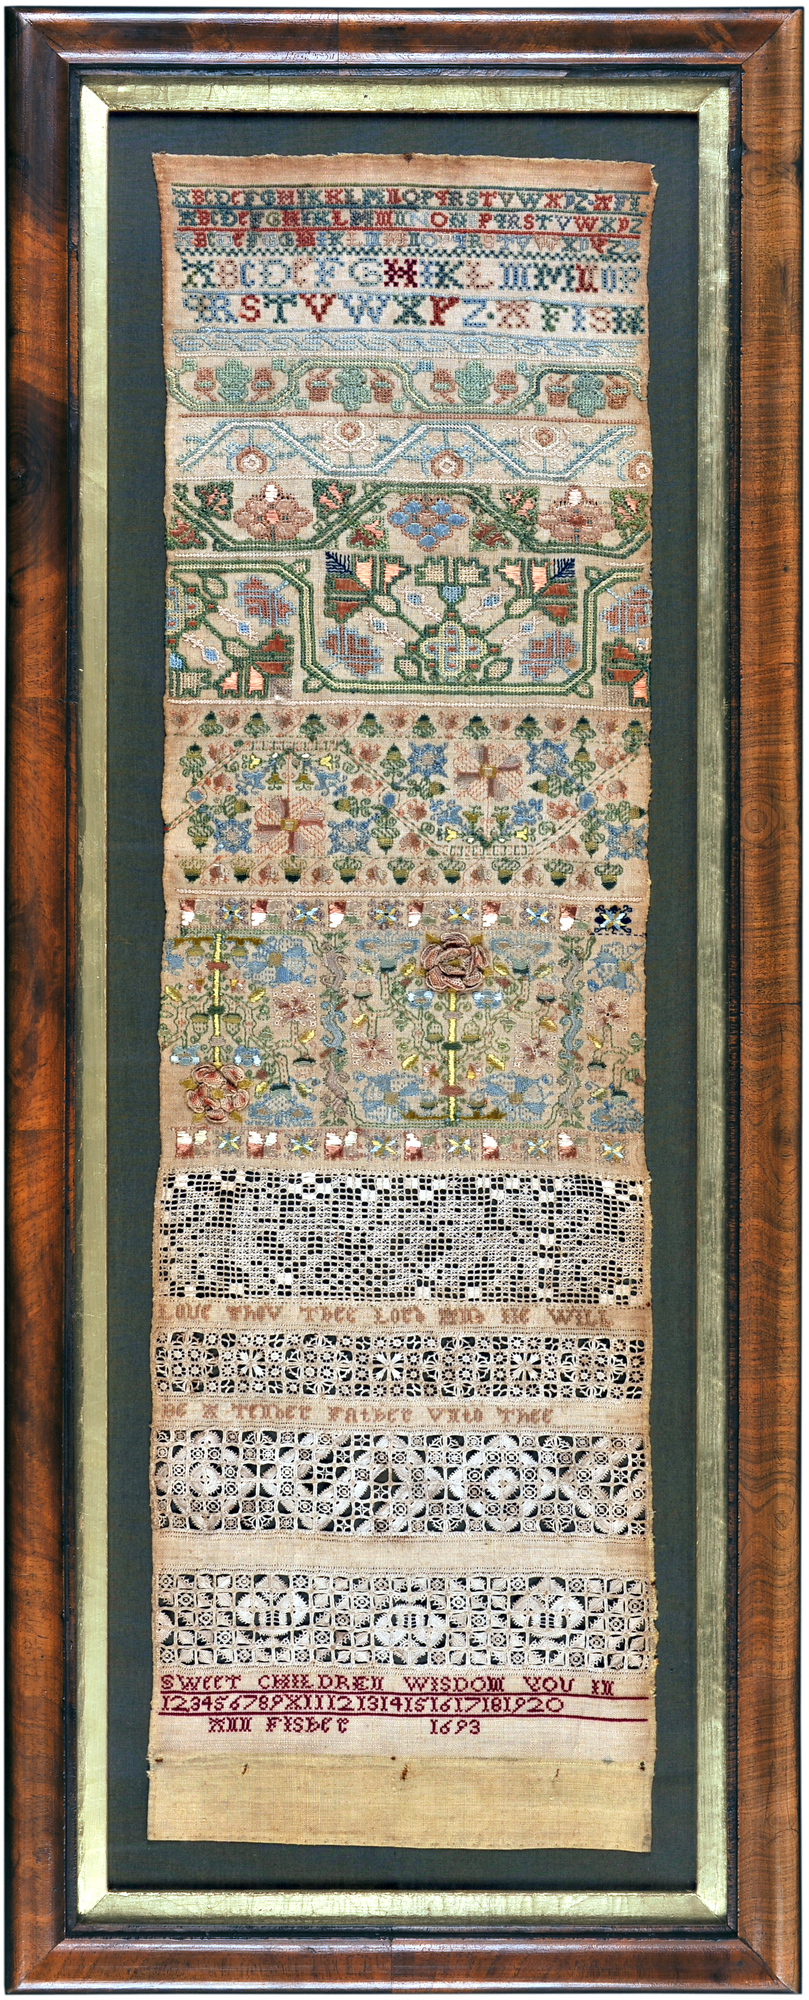 Band Sampler by Ann Fisher, 1693